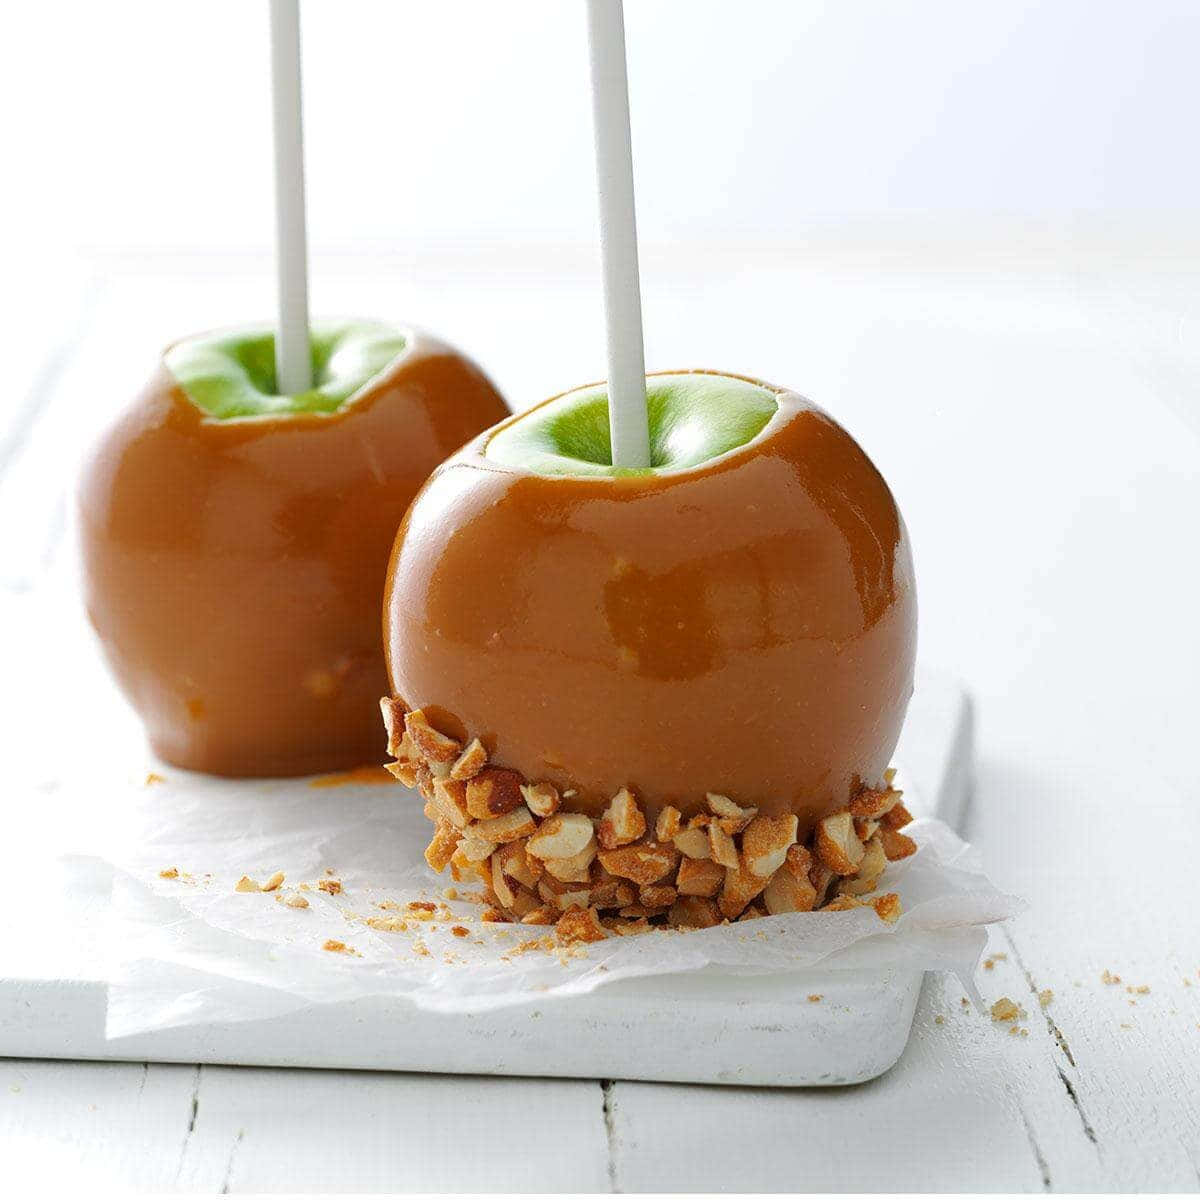 Delicious Caramel Apples on Wooden Table Wallpaper